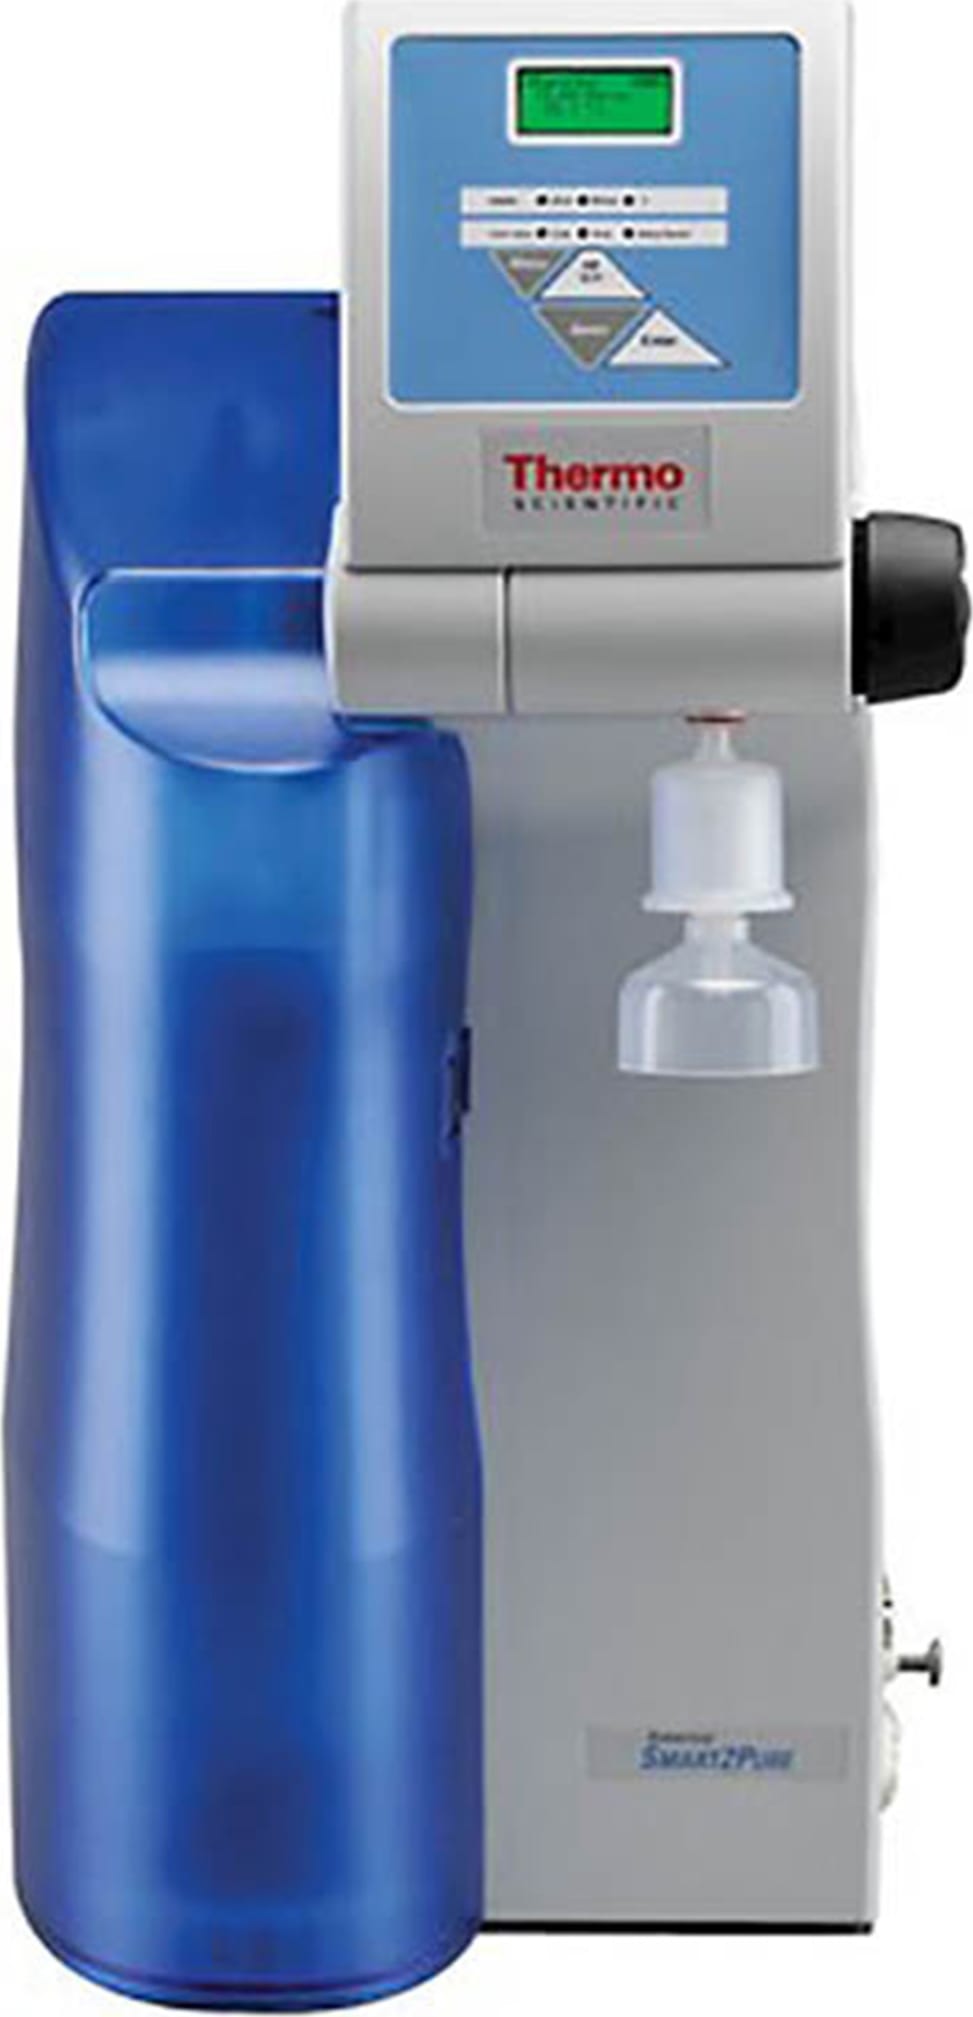 Thermo Scientific Barnstead Barnstead Smart2Pure 6 UV UF Water Purification System